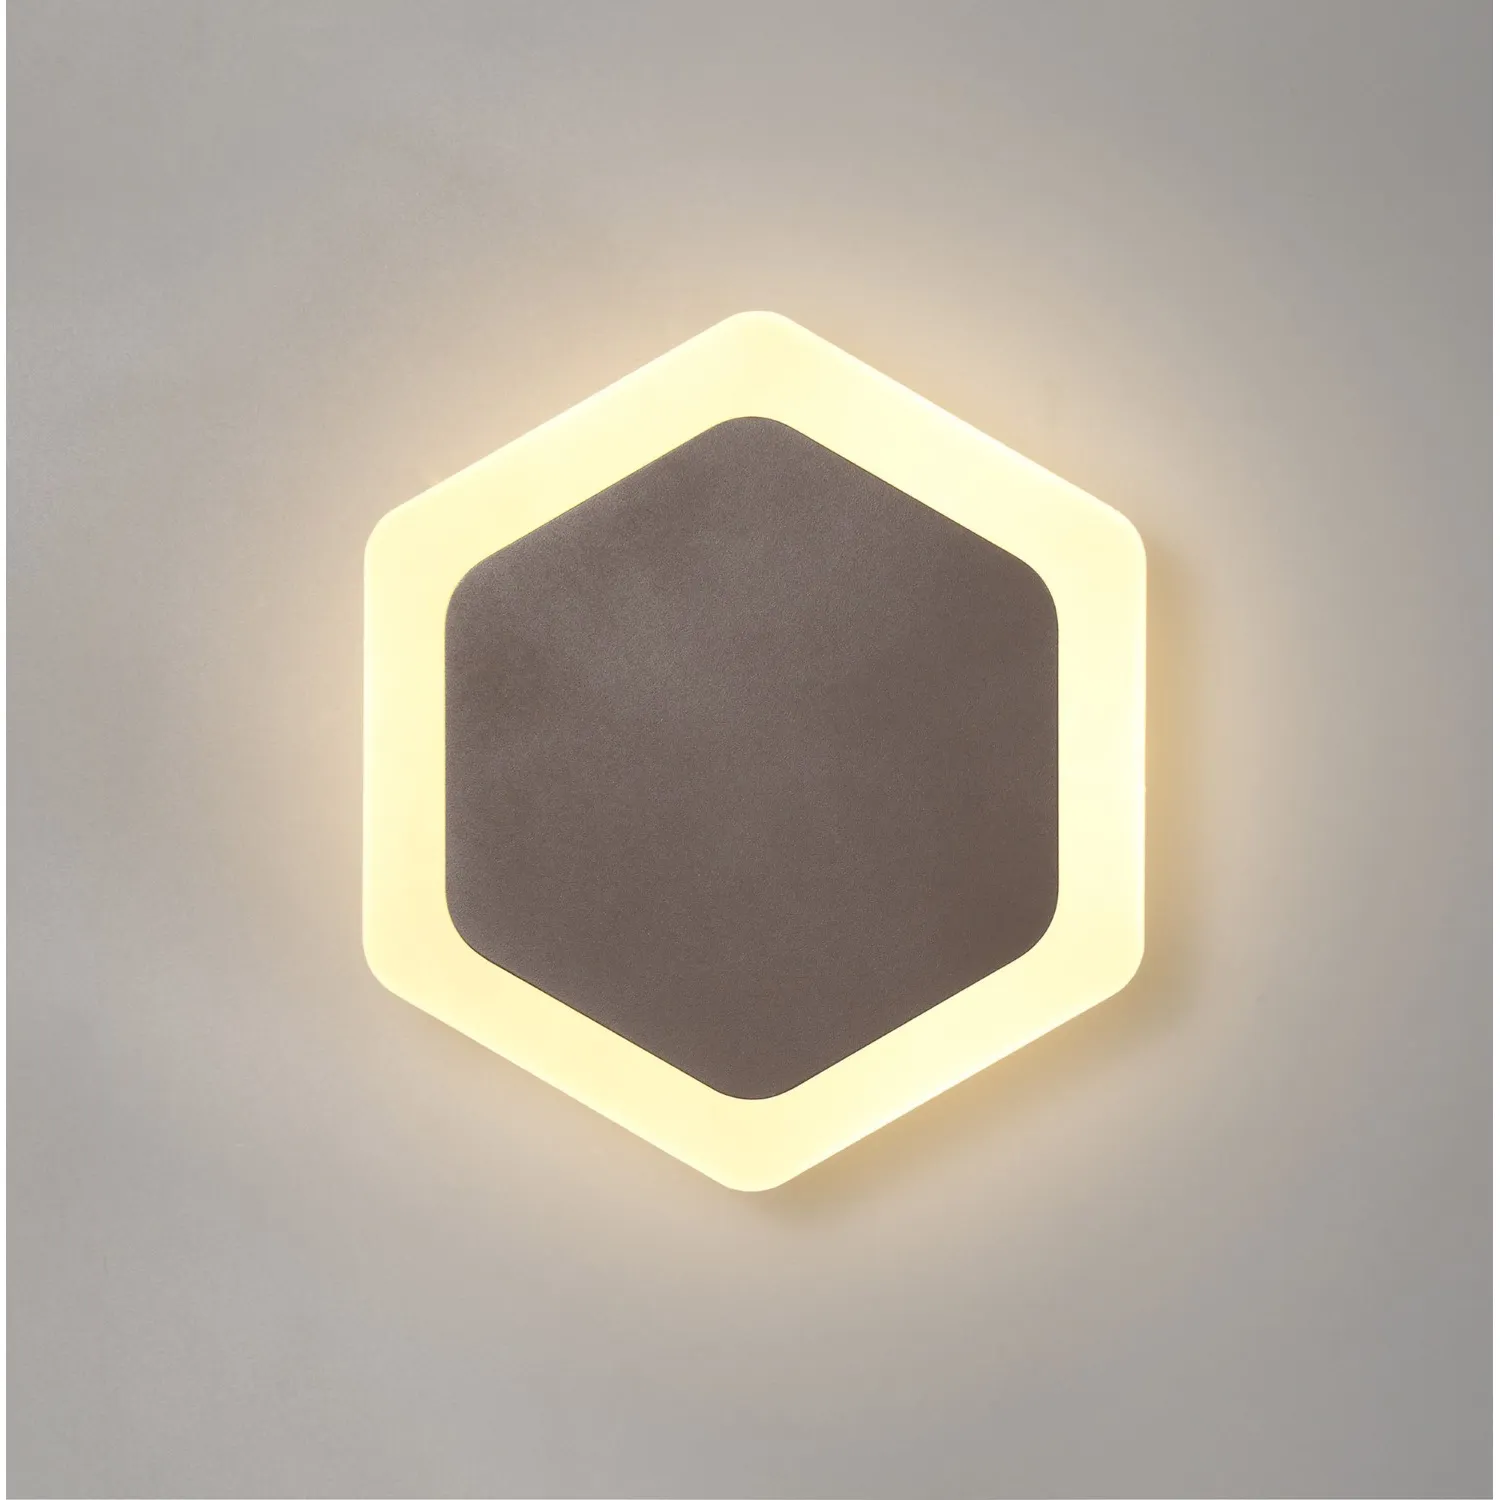 Edgware Magnetic Base Wall Lamp, 12W LED 3000K 498lm, 15 19cm Vertical Hexagonal Centre, Coffee Acrylic Frosted Diffuser